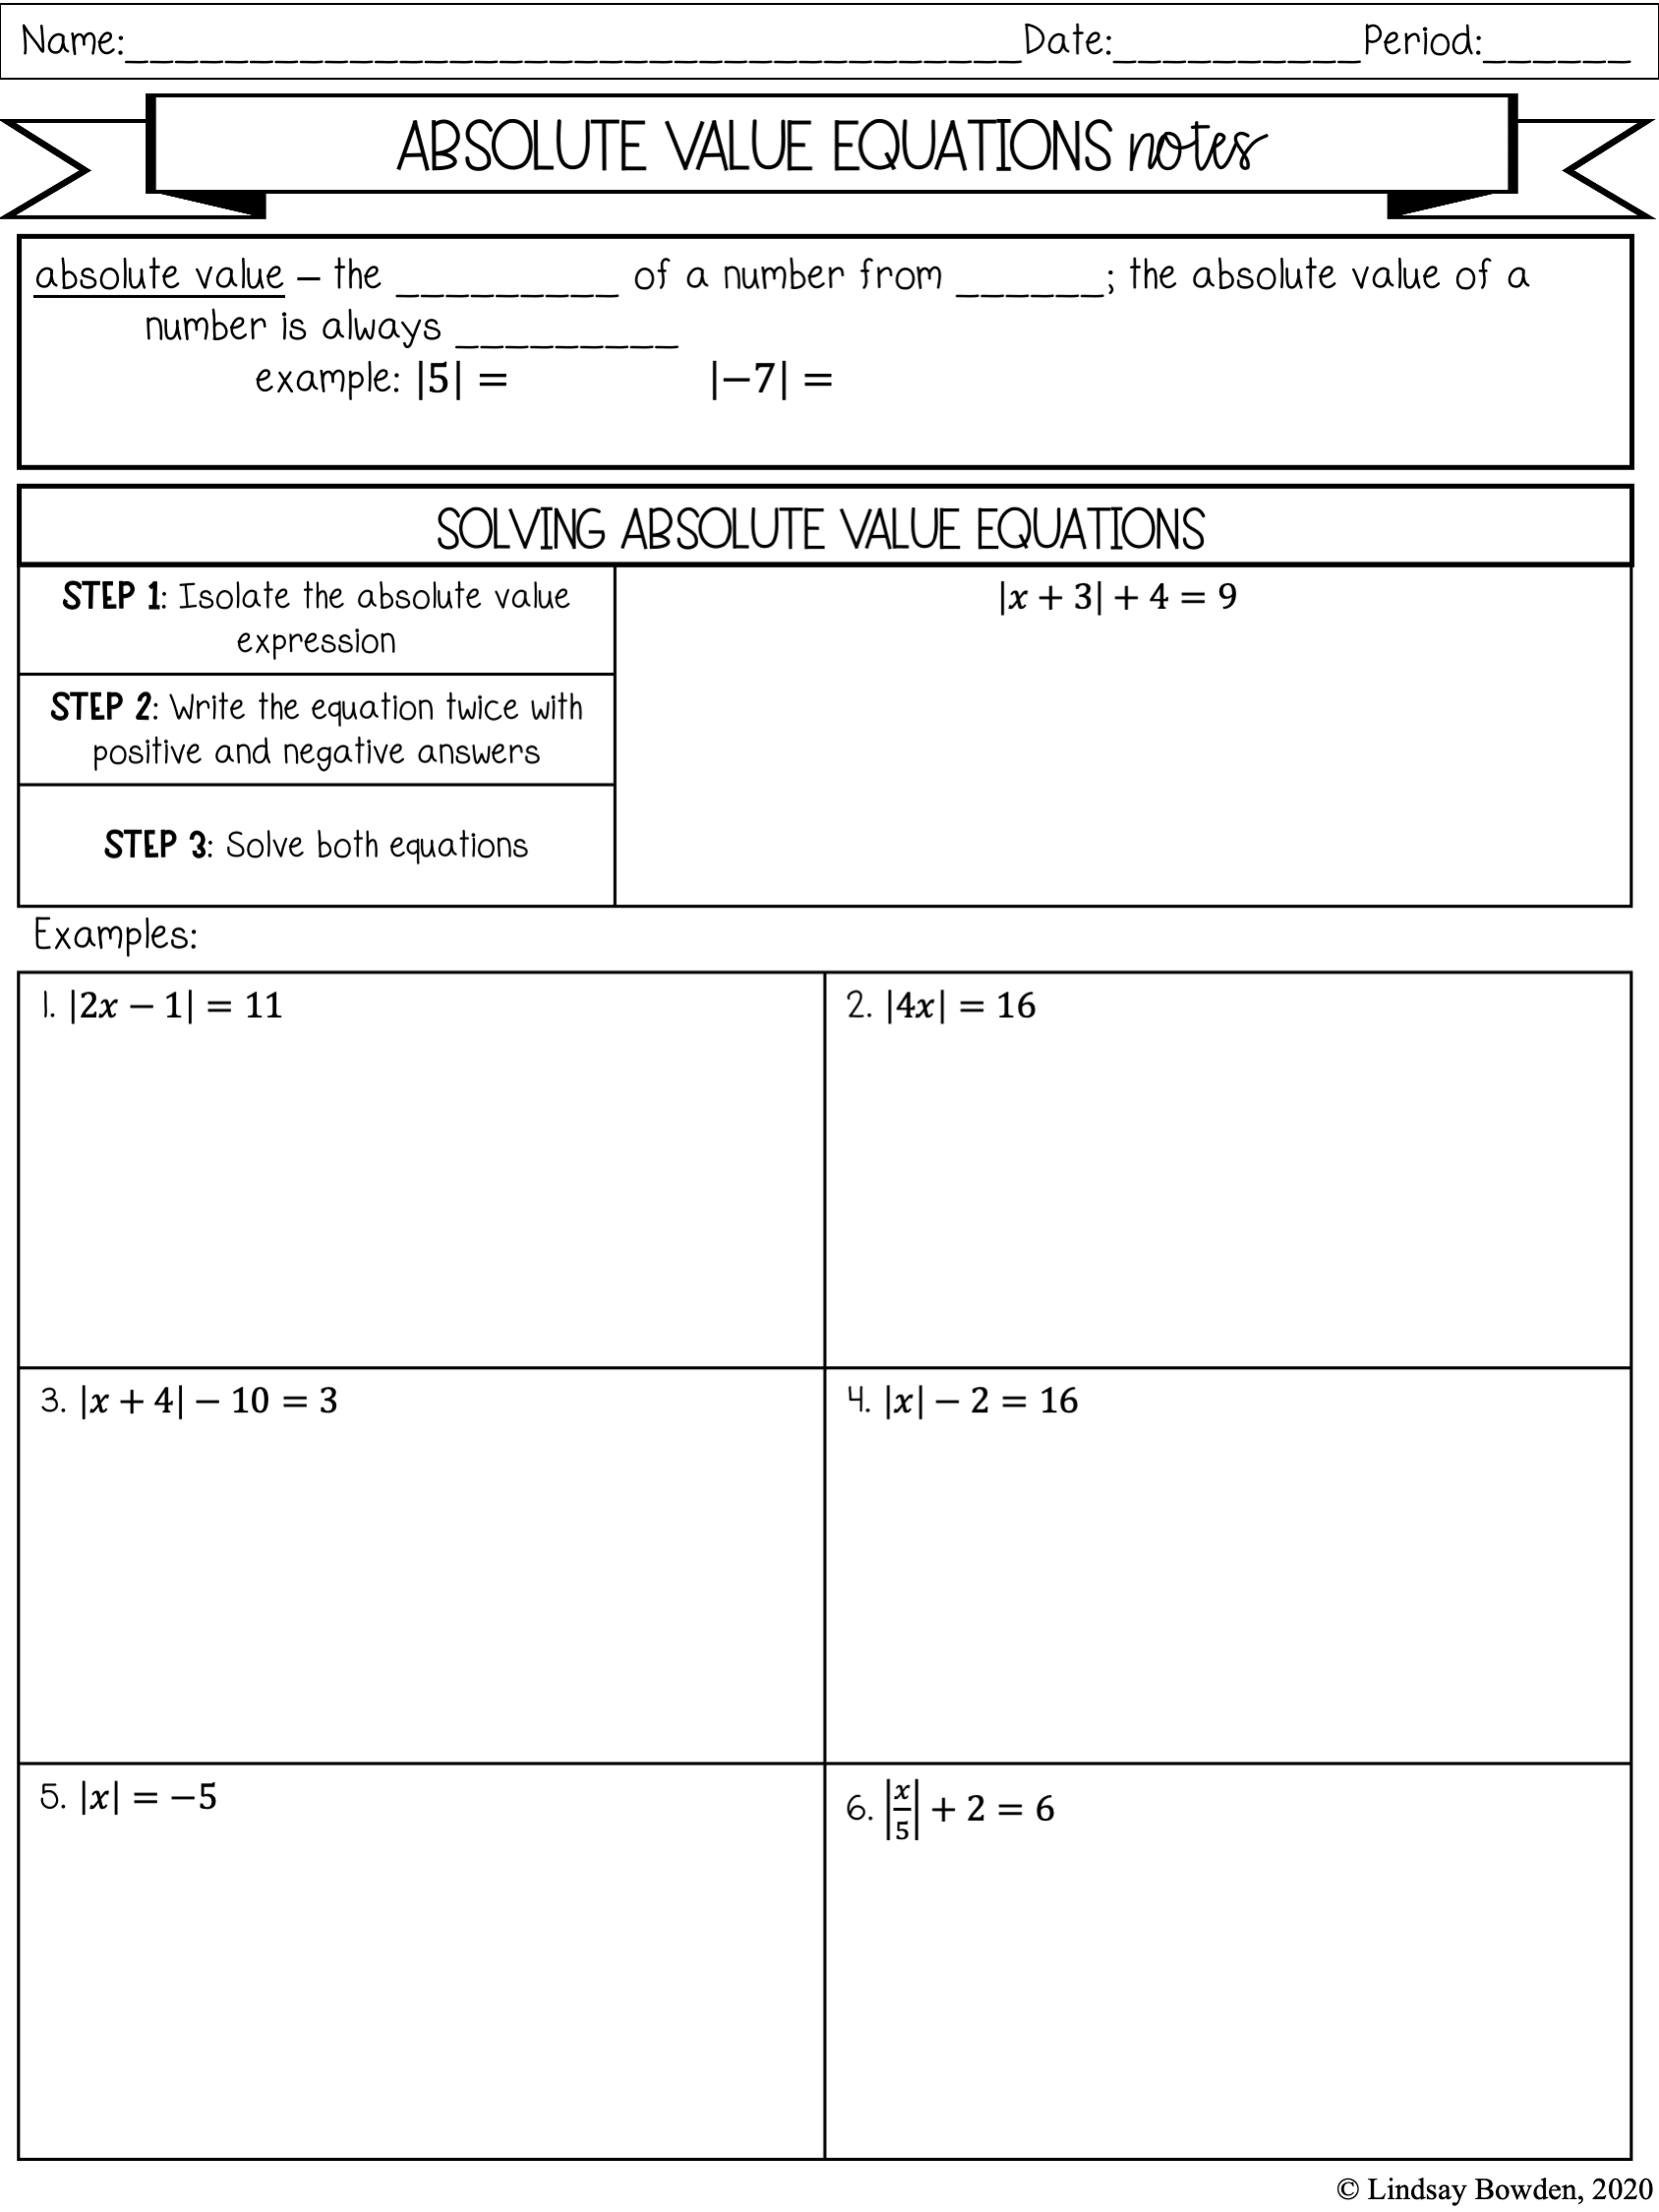 Absolute Value Notes and Worksheets - Lindsay Bowden With Absolute Value Function Worksheet